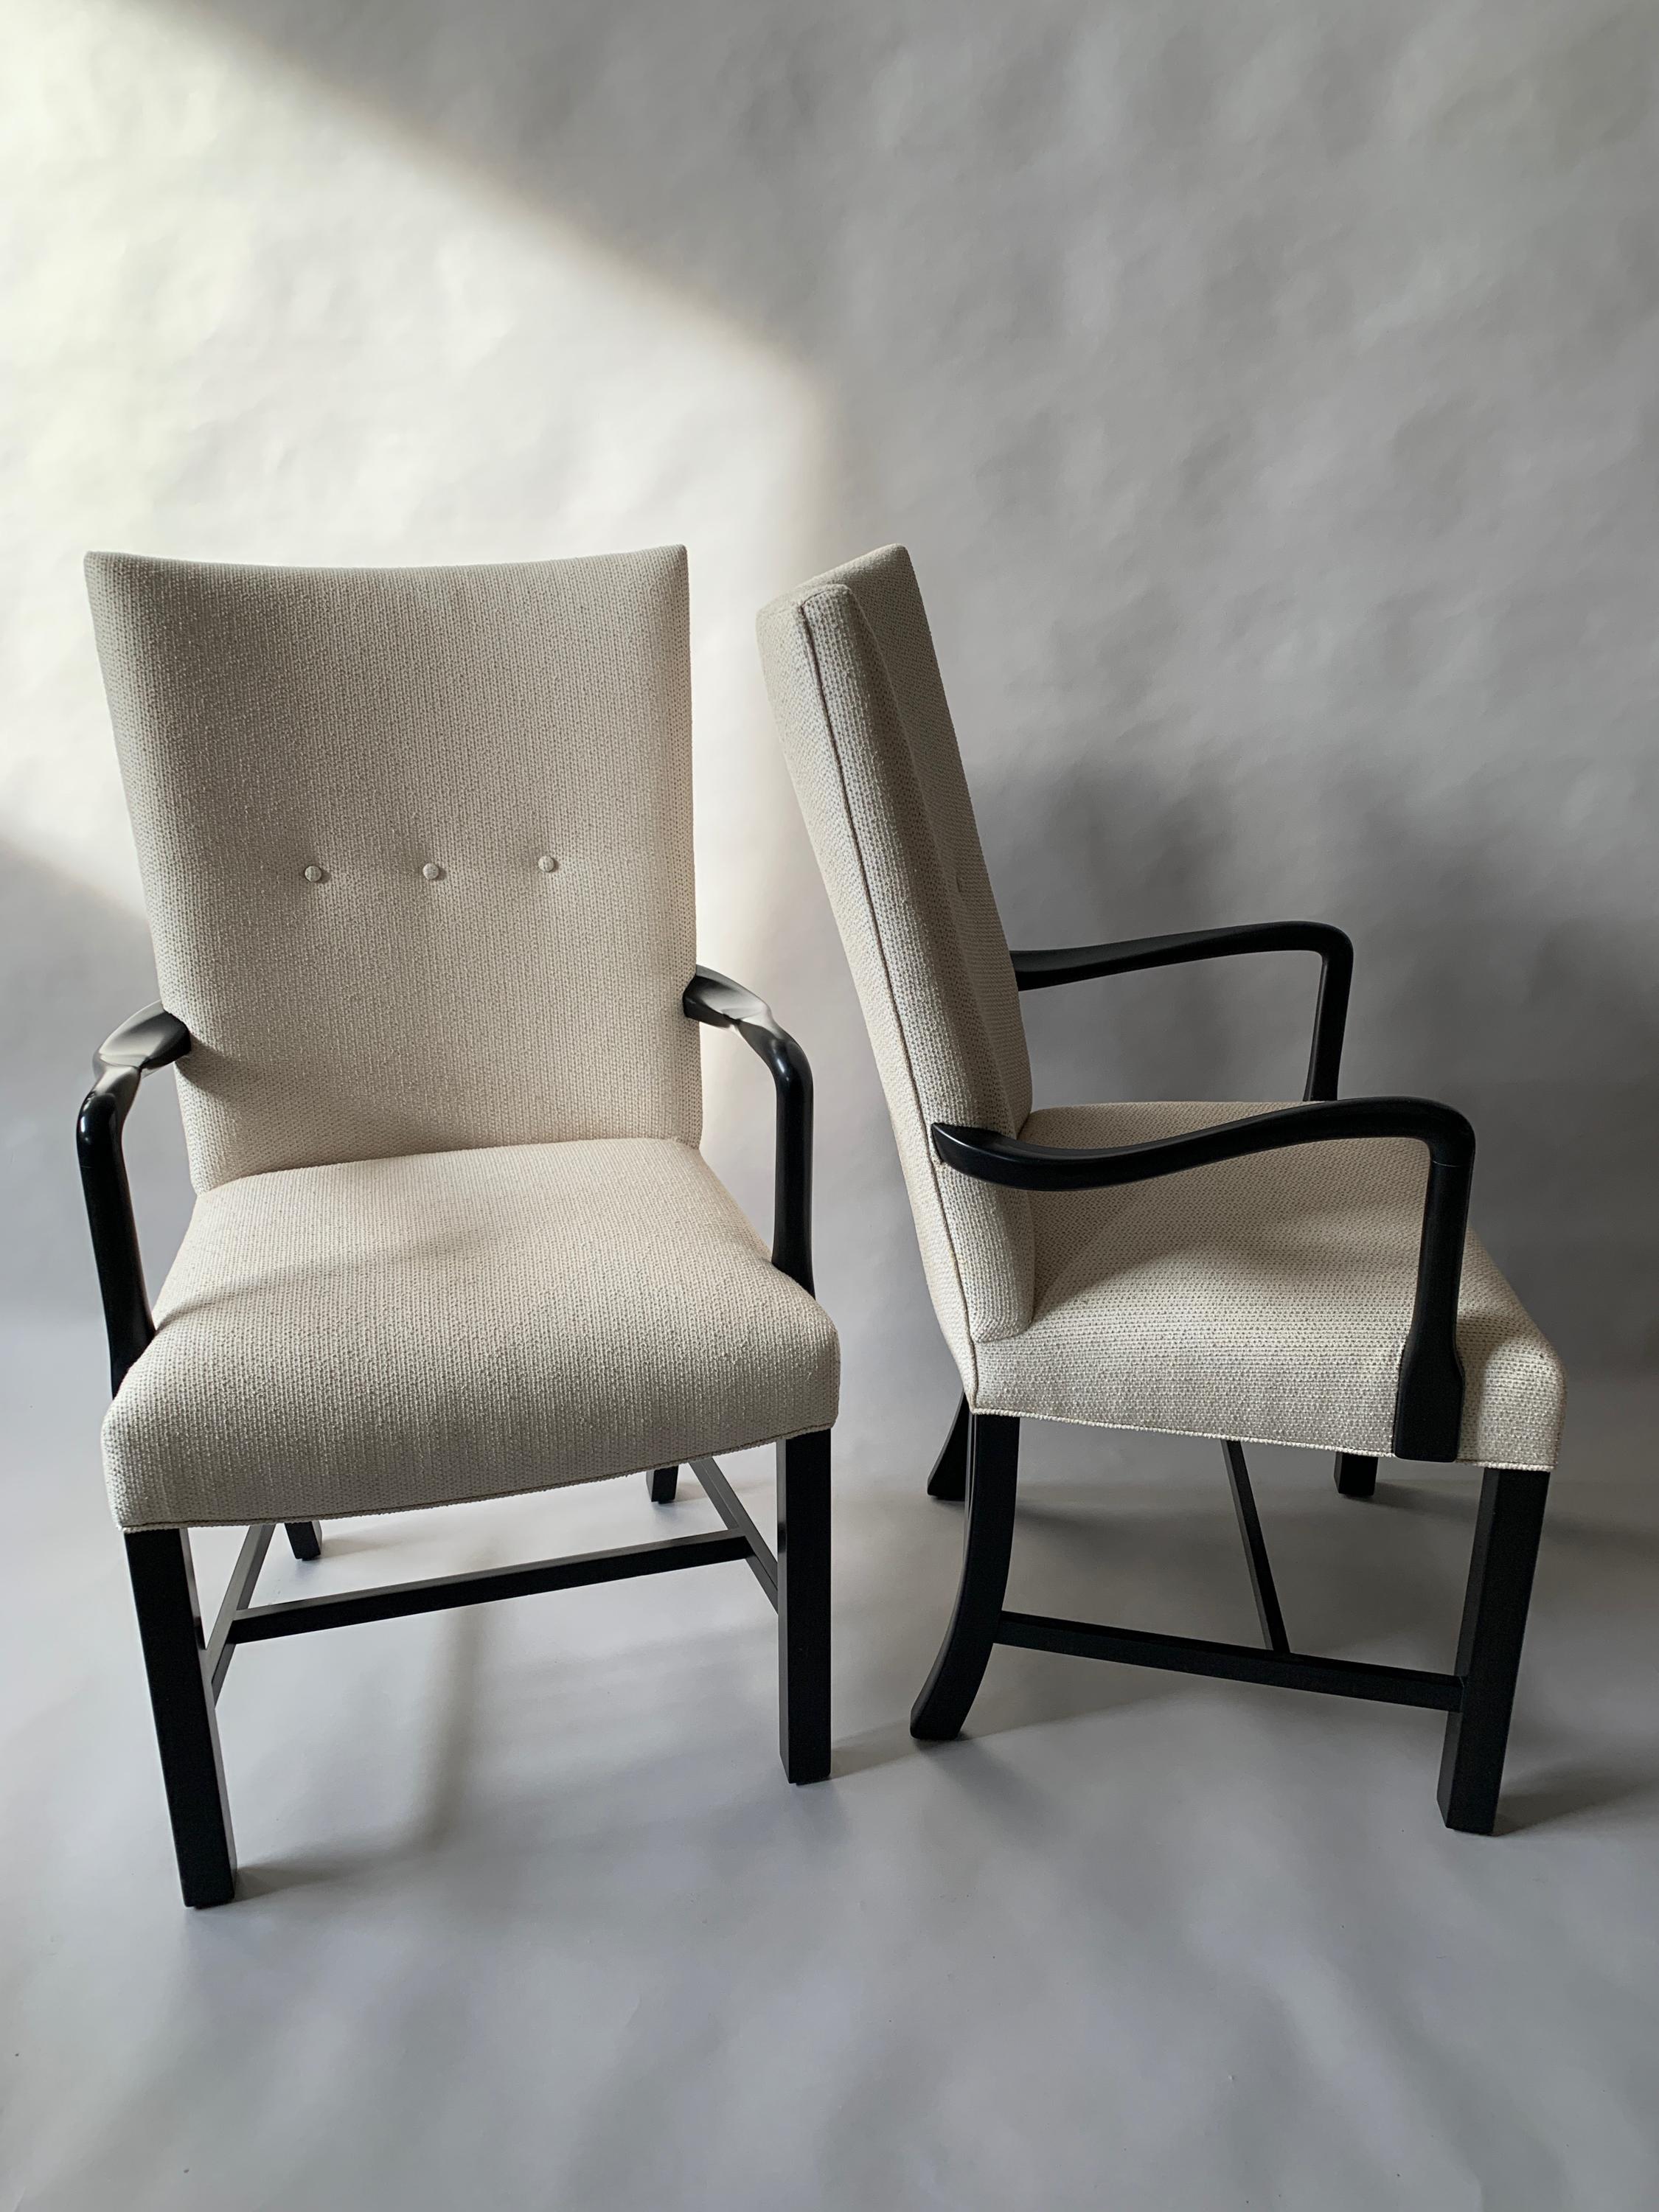 Pair of Danish 1940s ebonized armchairs/side chairs with curved arms. Newly upholstered in Sunbrella with button tufting to the back. 
Measure: Arm height - 27.5